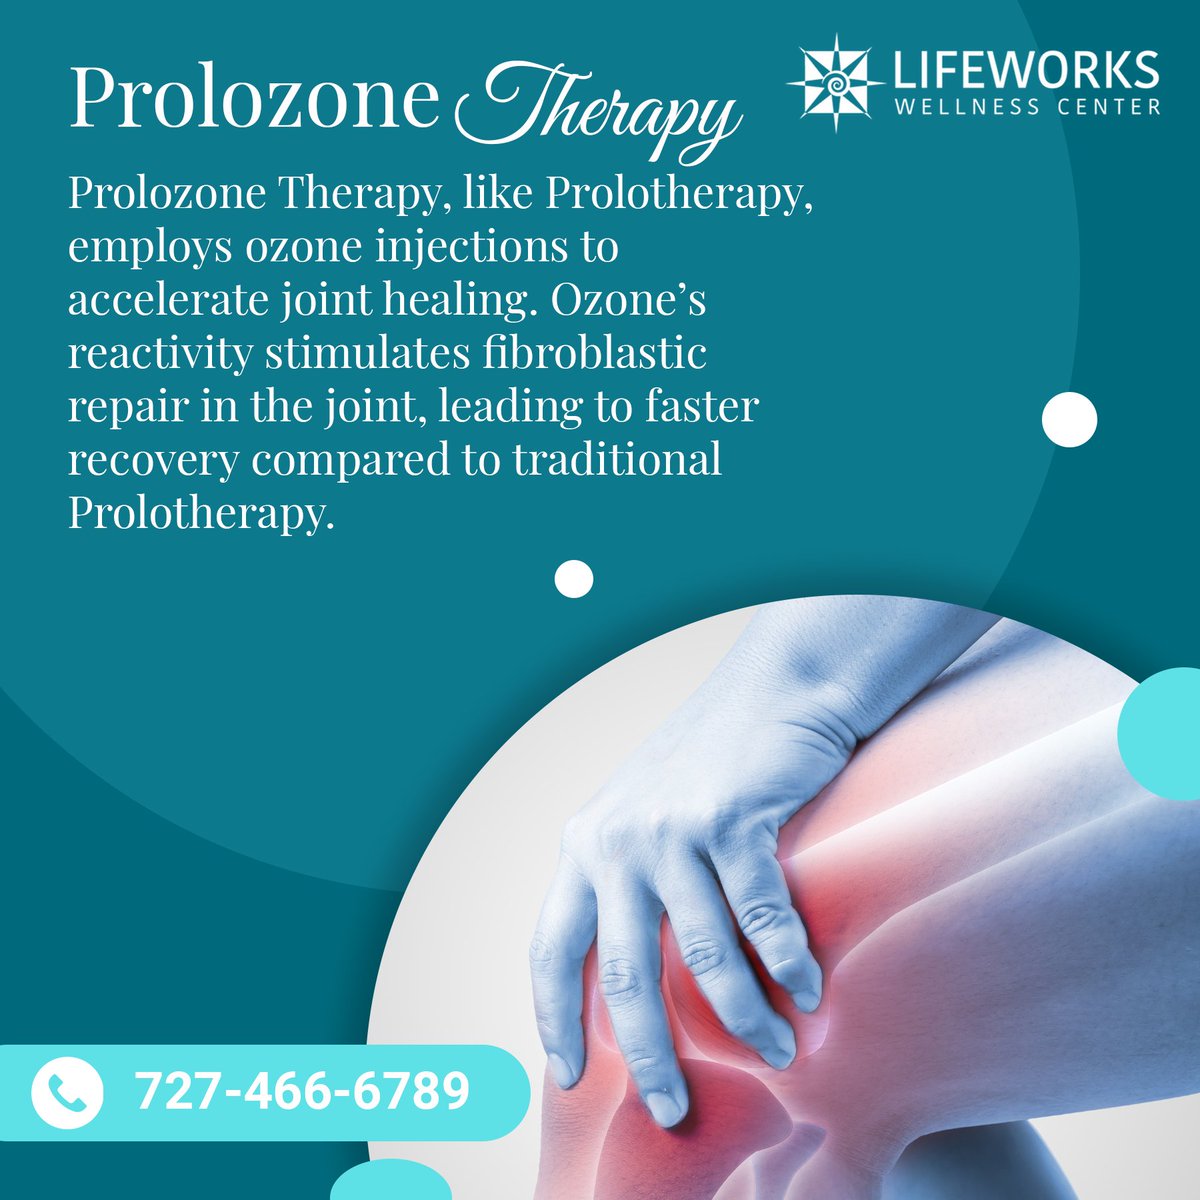 Revitalize, rejuvenate, reclaim with Prolozone Therapy – a natural approach to healing and pain relief, harnessing the power of oxygen and ozone for holistic wellness. #ProlozoneTherapy #NaturalHealing #PainRelief #HolisticWellness